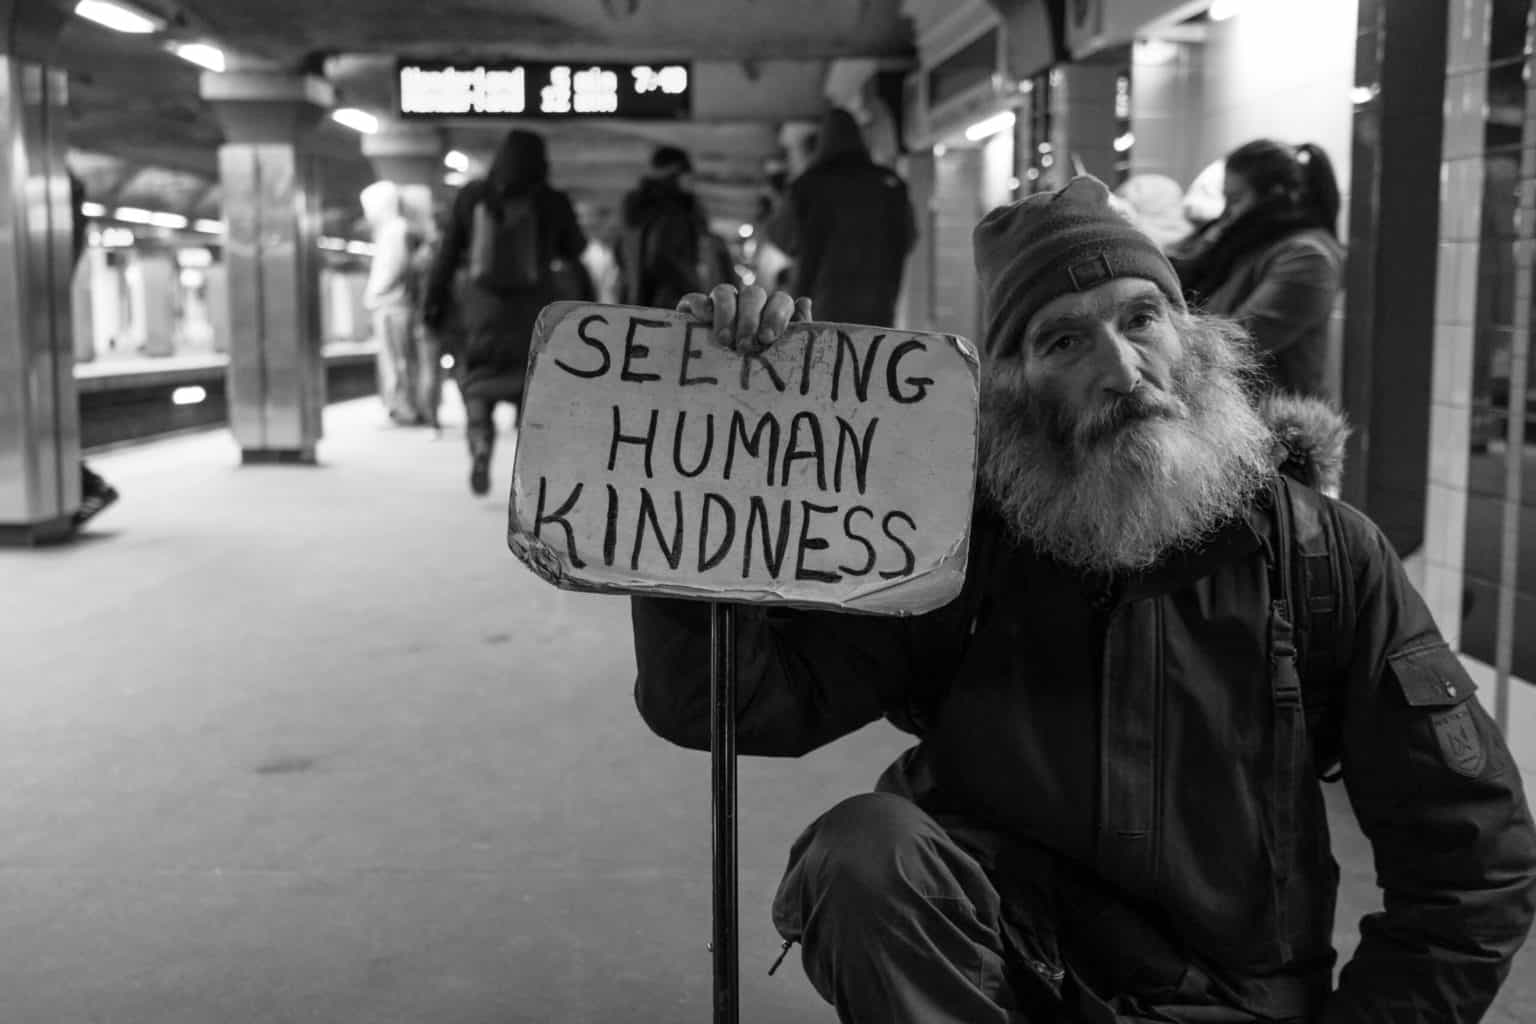 https://breakyourboundaries.tv/seeking-human-kindness-print - Prints Available - 25 % proceeds goes to supporting homelessness - I met Michael in a Boston subway station. I told him I liked his sign. “What matters is what it means to you,” he told me.I asked what it meant to him. “Doing a deed or expressing kindness to another person without expecting anything in return,” Michael said.I love approaching strangers wherever I go. Listening and talking to them teaches you about people and how similar we all are to one another. Just like Michael, we’re all seeking human kindness.